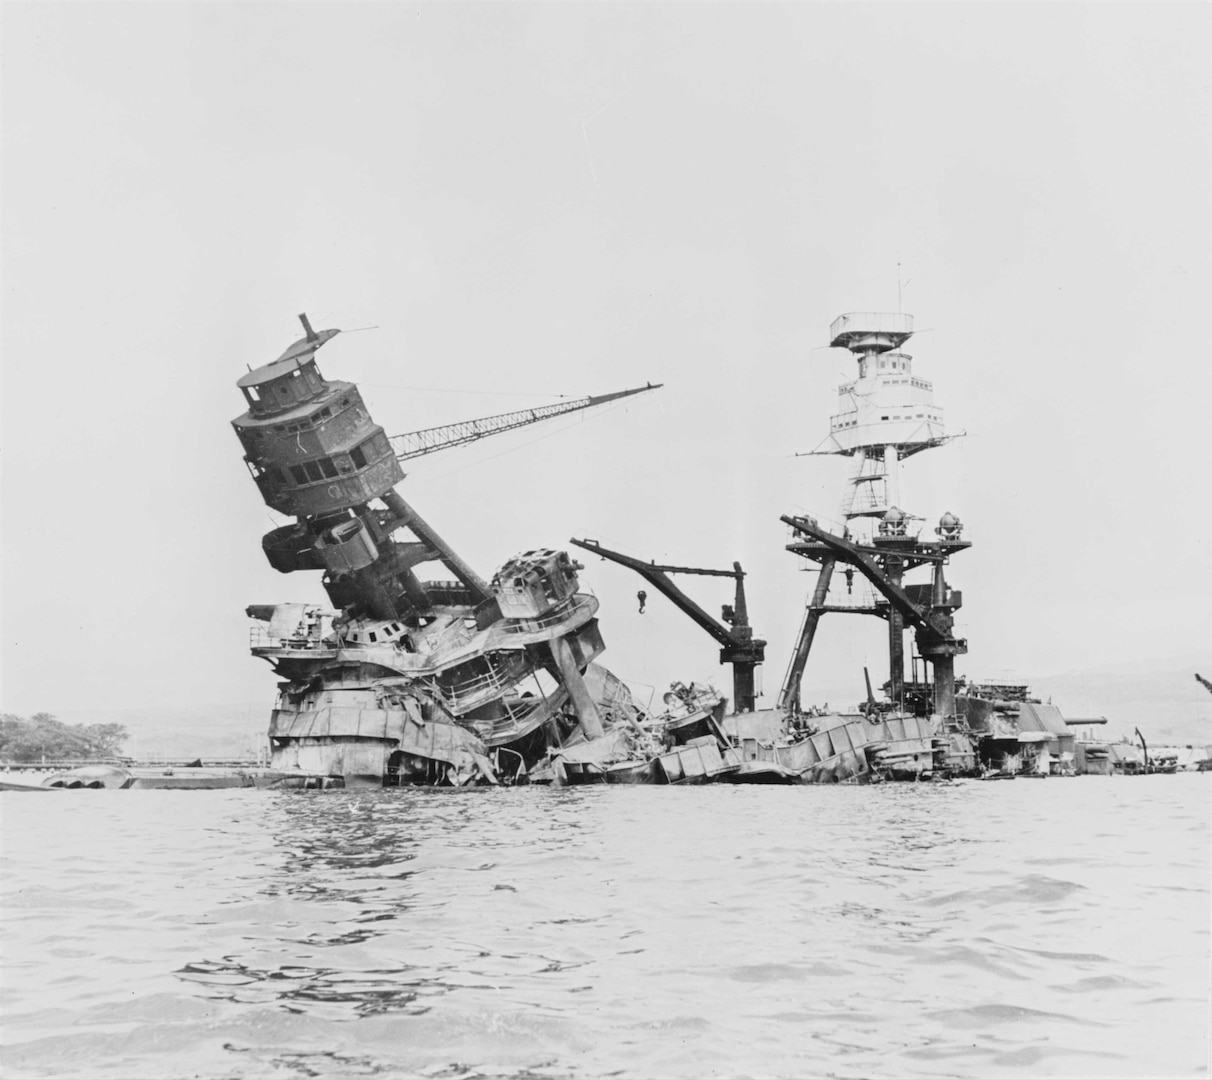 The battleship USS Arizona (BB-39), modernized at NNSY from 1929 to 1931, was destroyed during the Dec. 7, 1941 attack on Pearl Harbor.  An 1,800-pound bomb triggered a massive explosion and sunk the ship with more than 1,000 crewmembers trapped inside. This photo shows the Arizona three days after the attack.